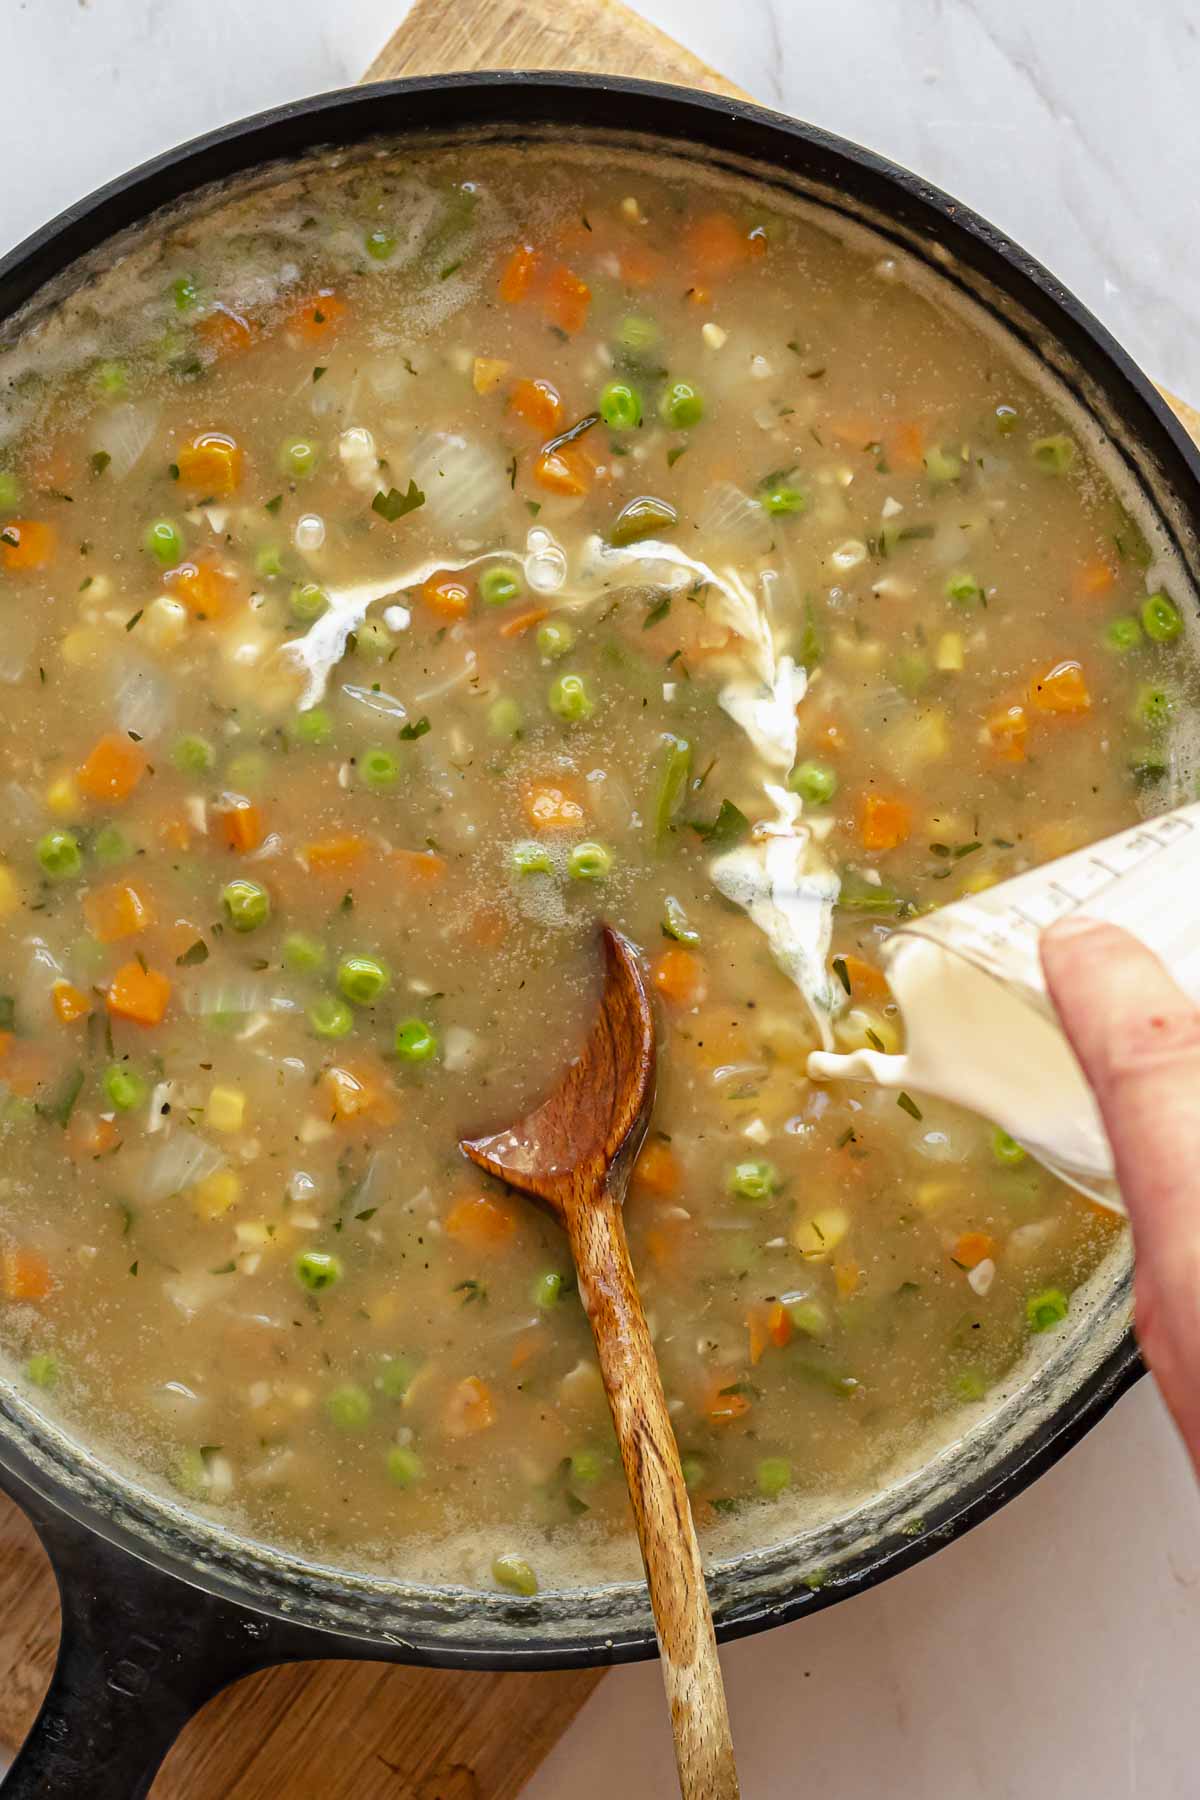 A hand pours heavy cream into vegetables and stock in a pan.